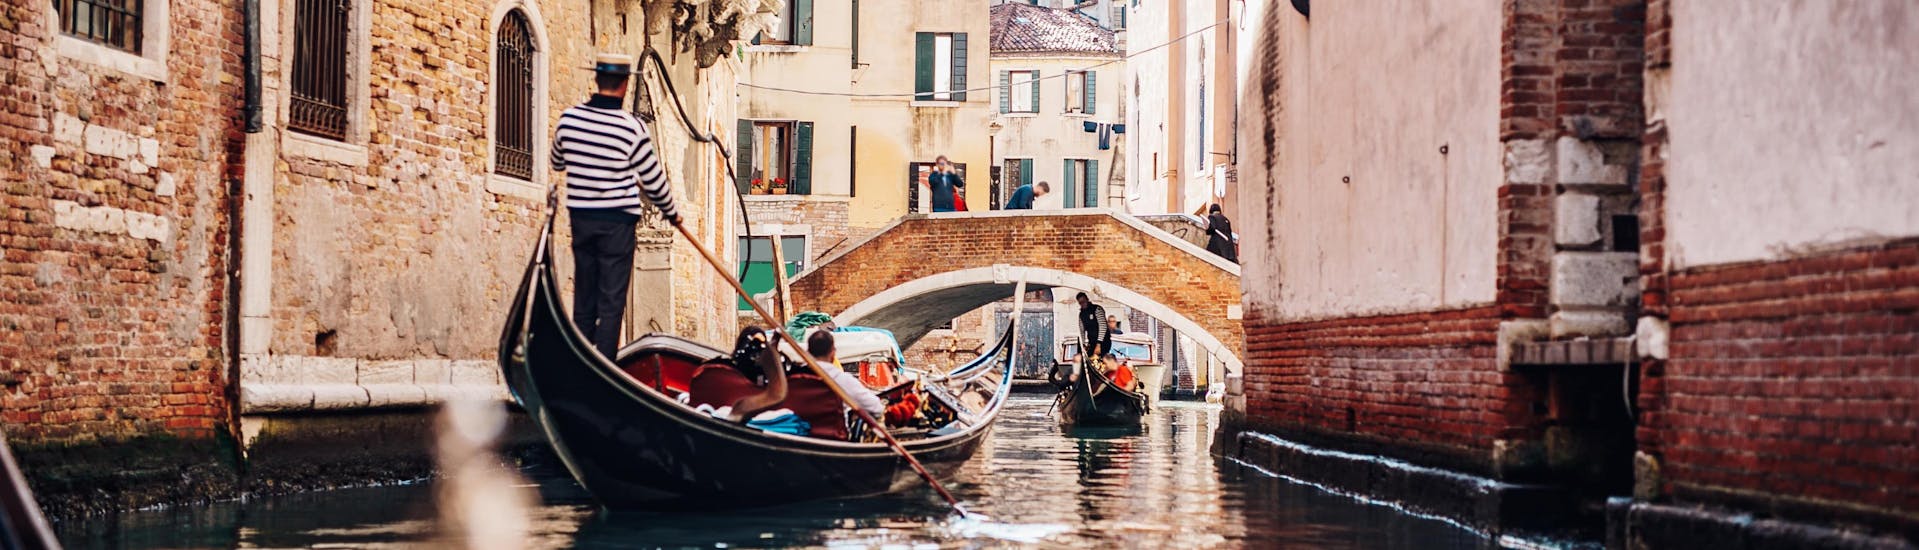 A gondoliere is paddling the boat through a narrow canal on a gondola ride in Venice.